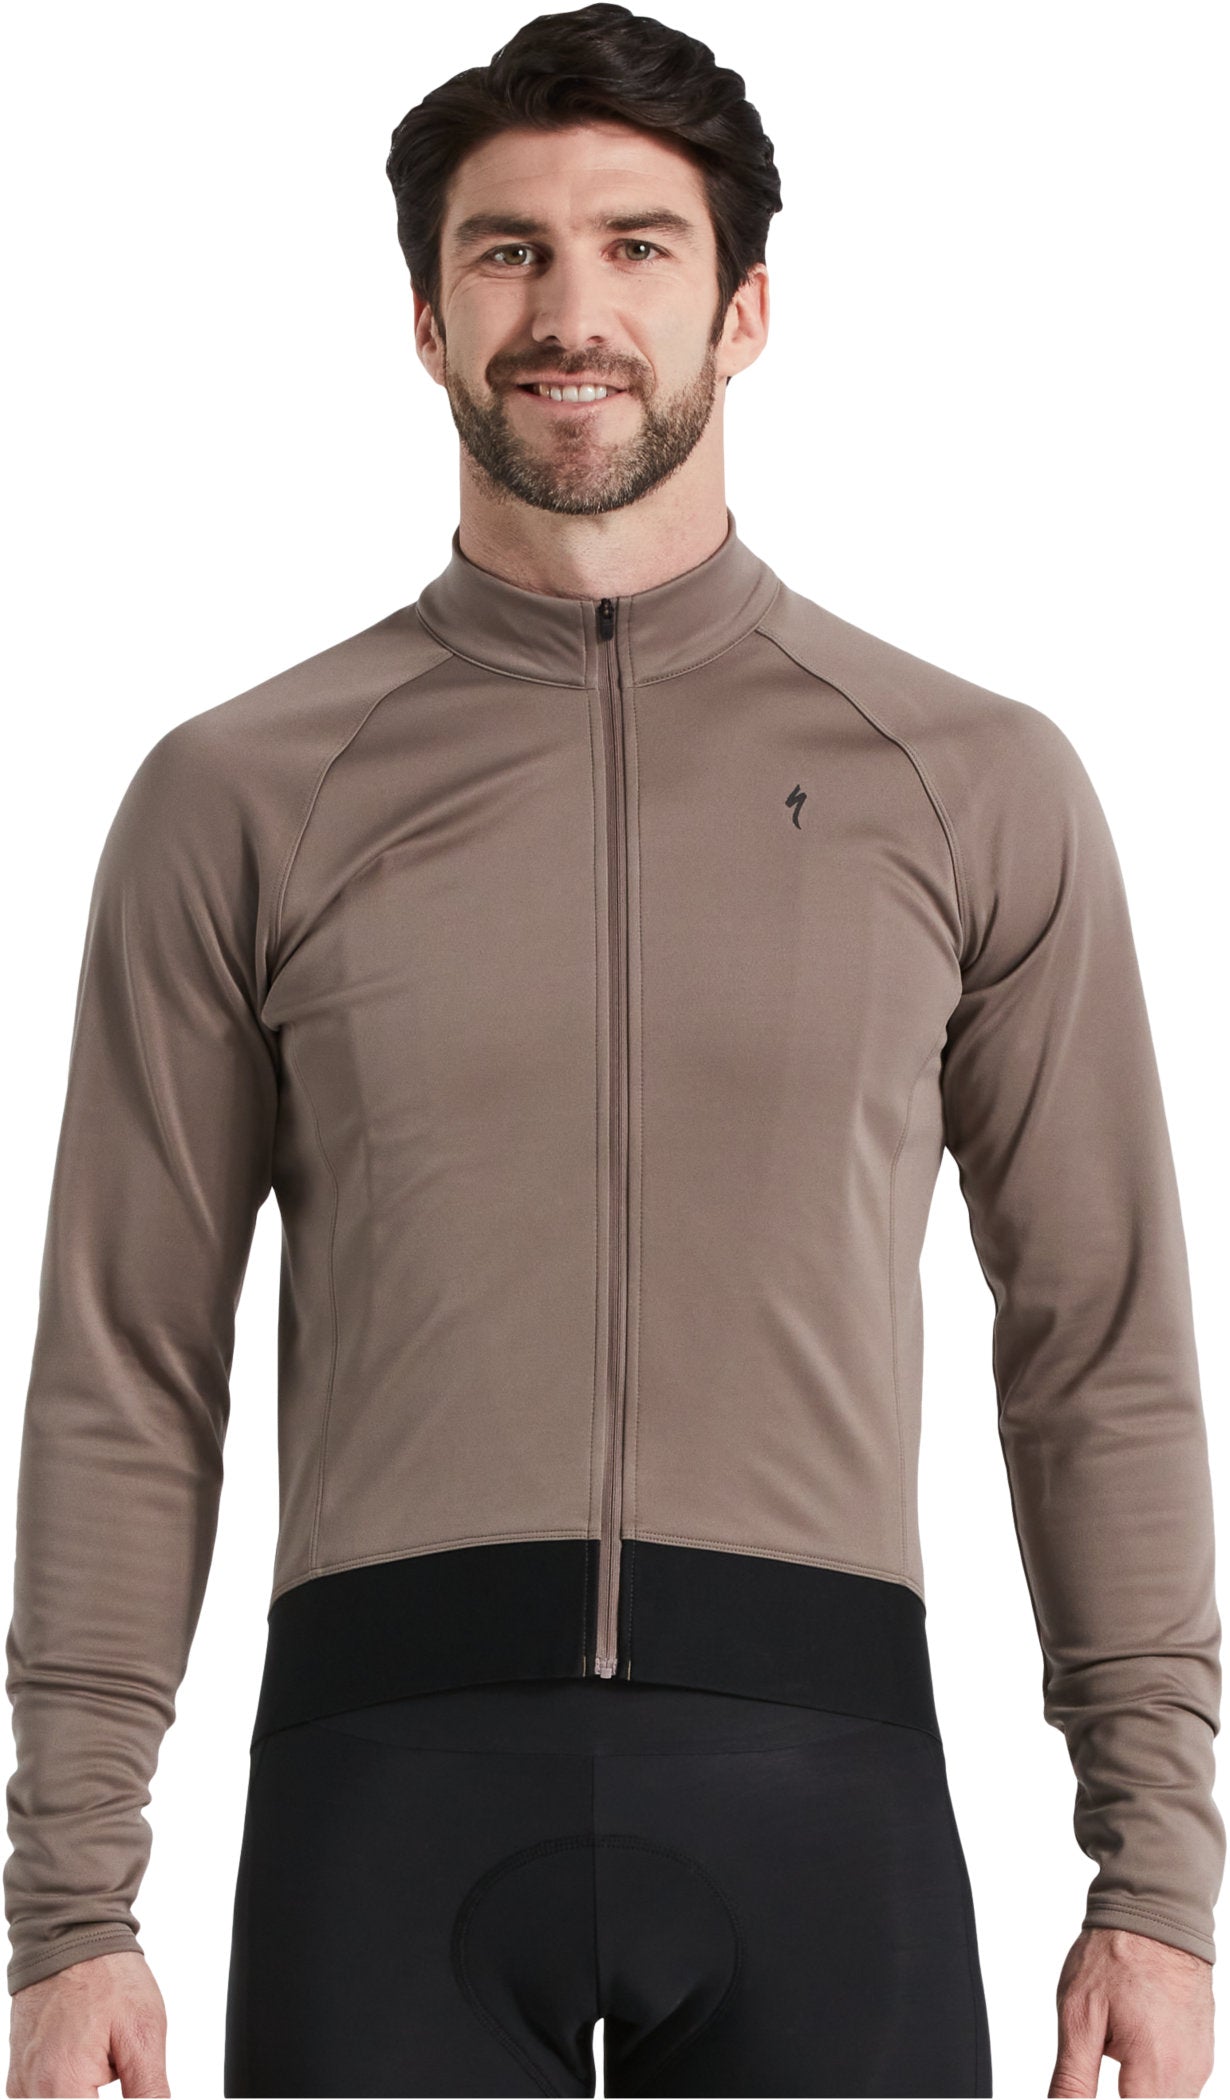 Specialized Men's RBX Expert Long Sleeve Thermal Bicycle Jersey